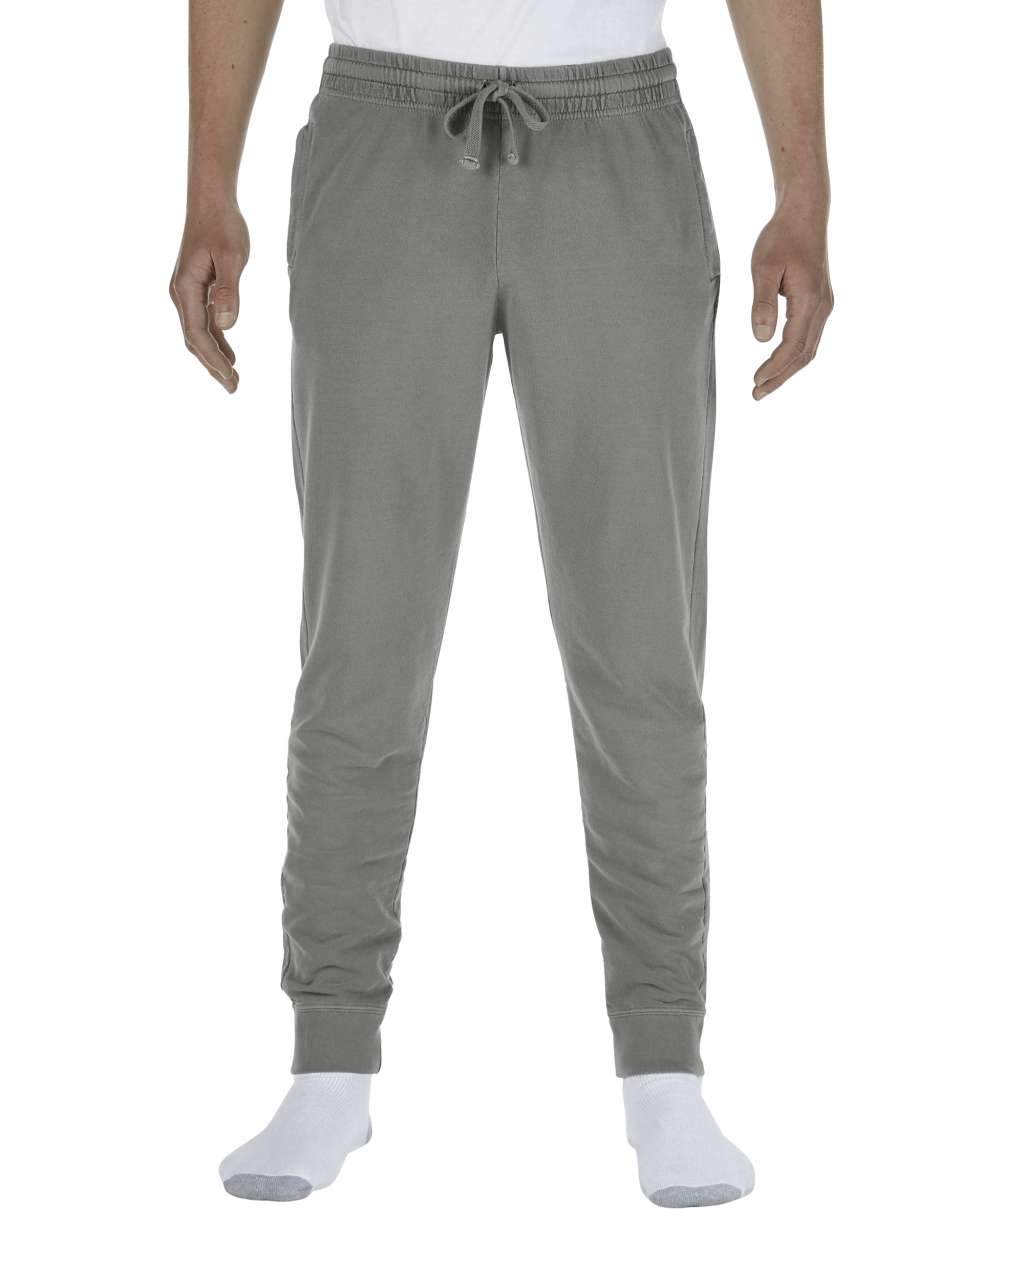 ADULT FRENCH TERRY JOGGER PANTS - BRANIO